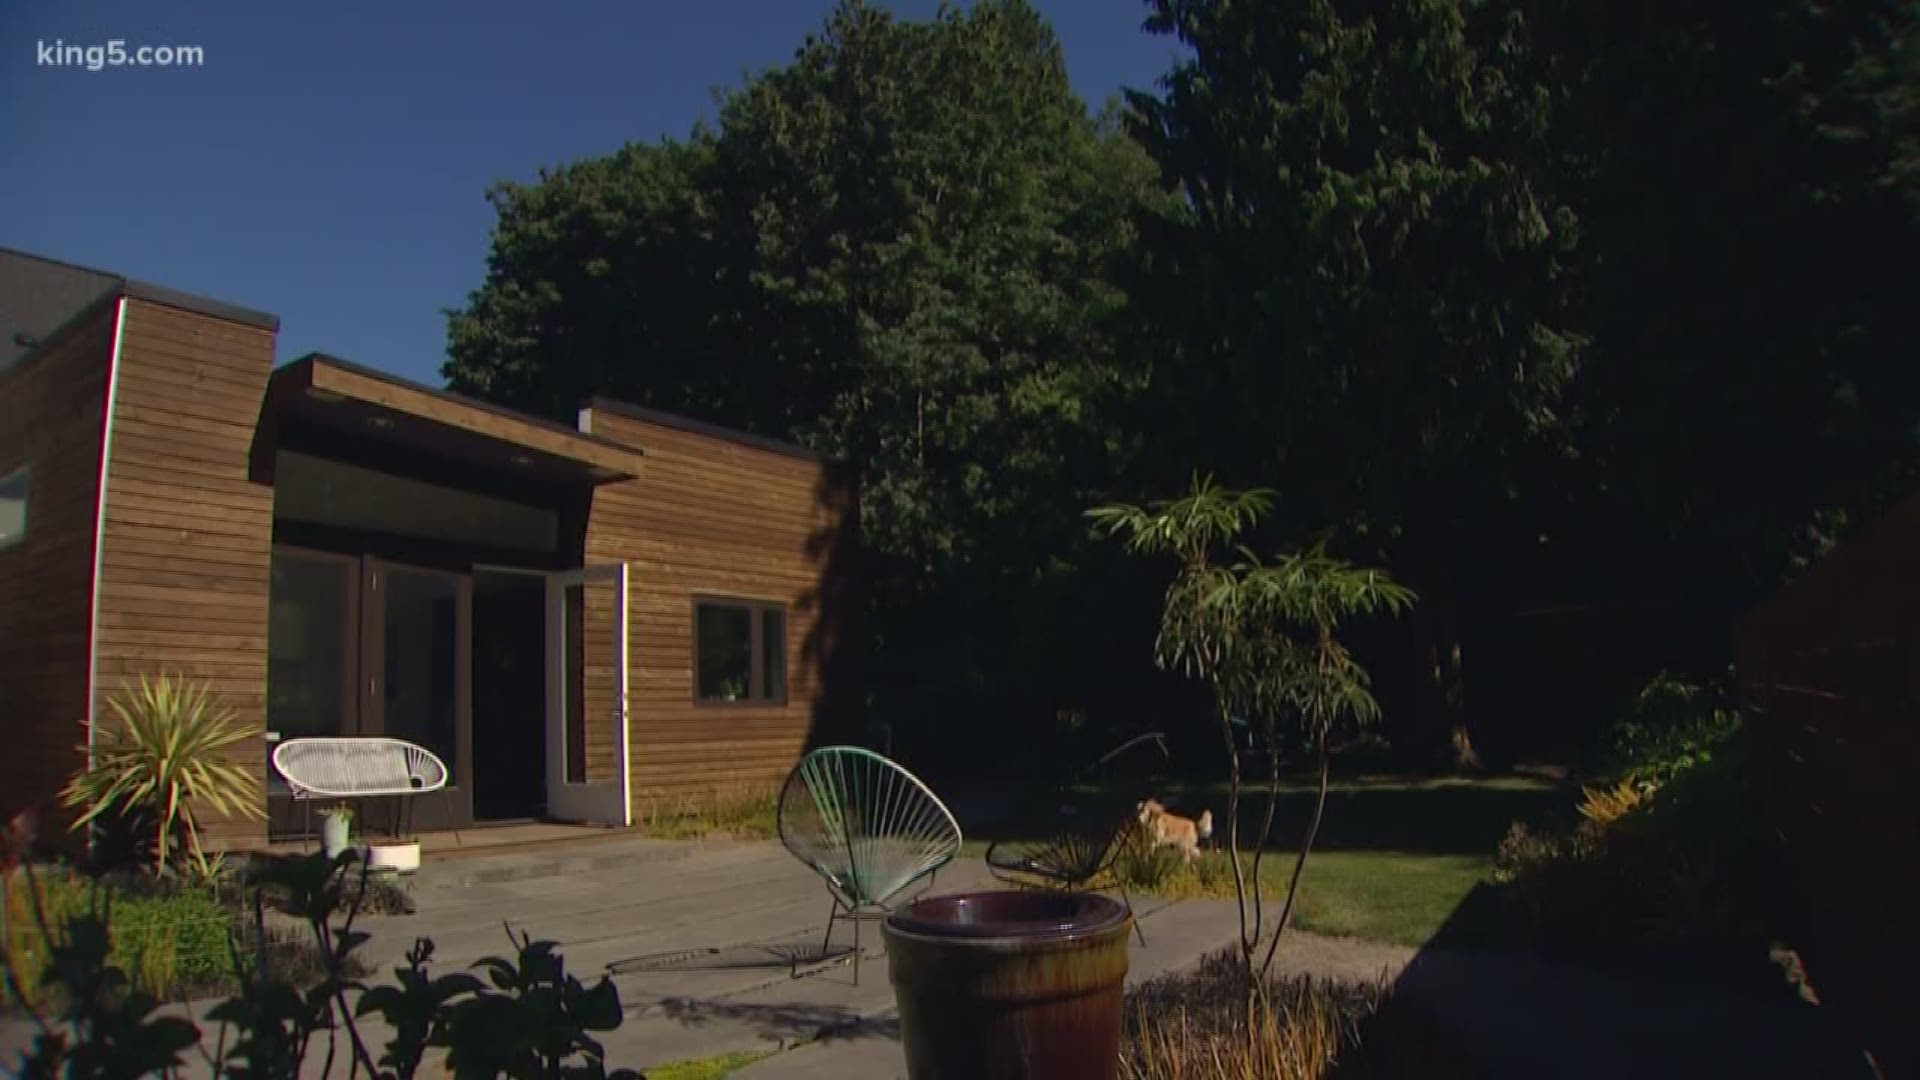 A public hearing was held at Seattle City Hall around whether to expand backyard cottages within city limits. KING 5's Natalie Swaby reports.